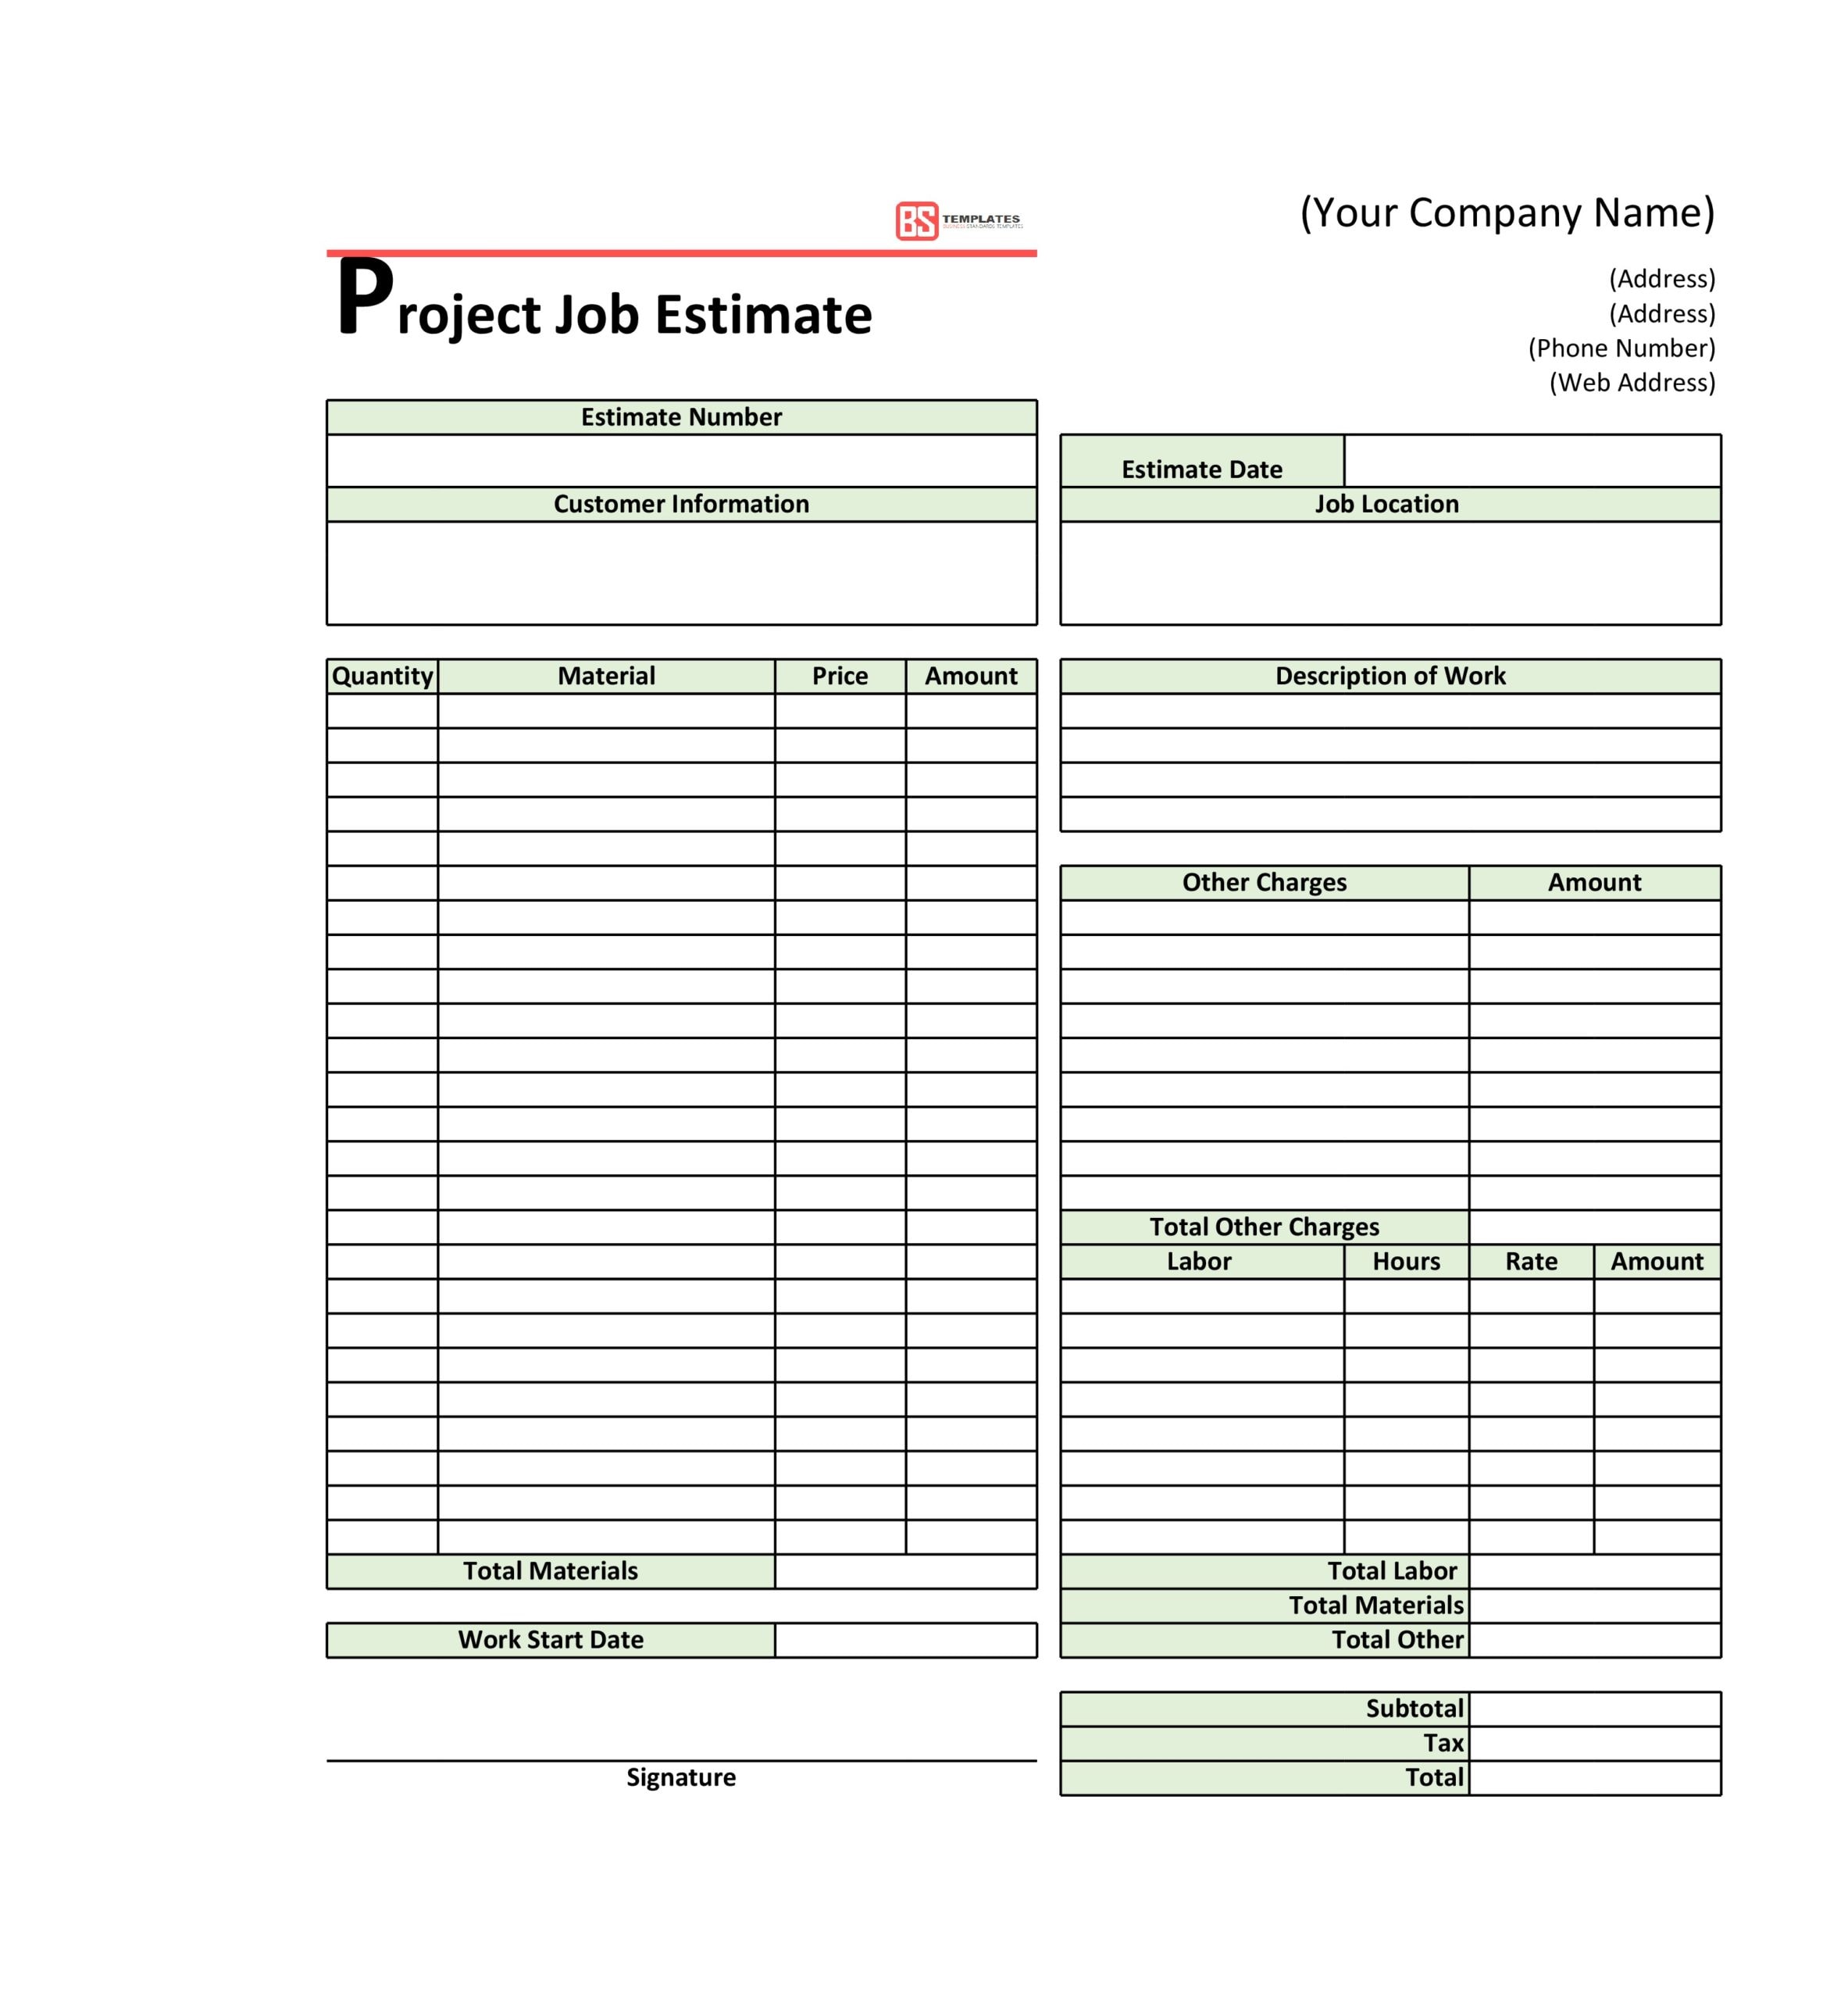 22 Perfect Construction Estimate Templates (FREE) - TemplateArchive With Regard To Work Estimate Template Word